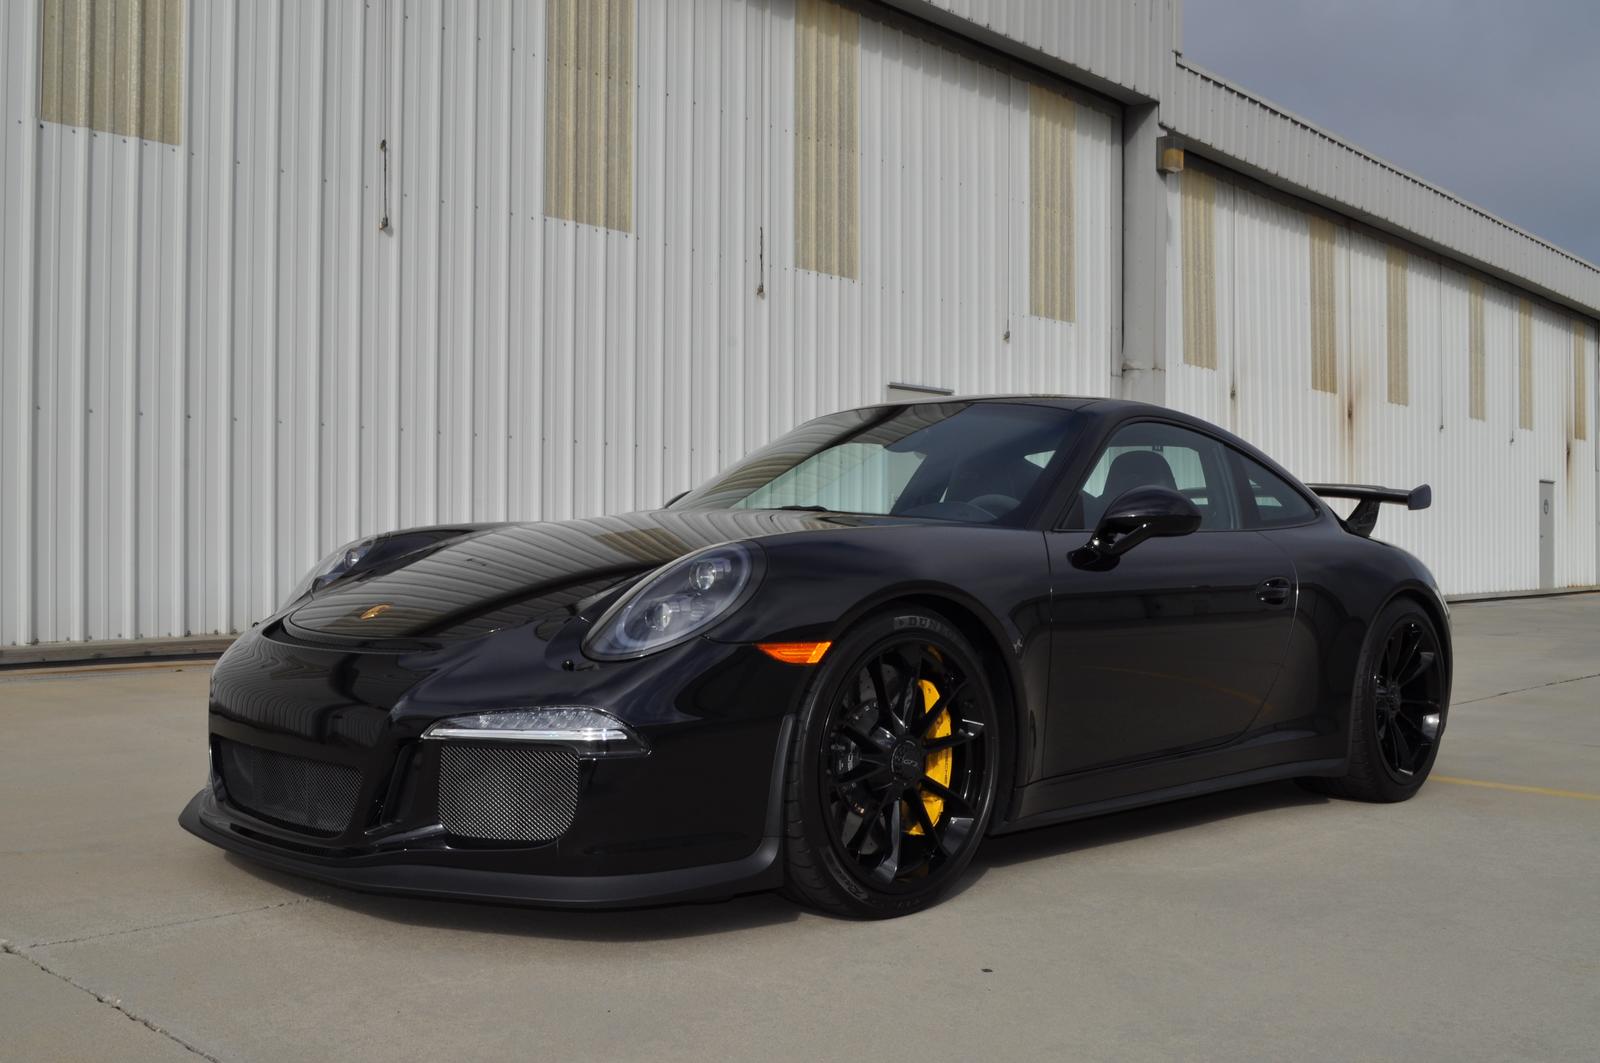 2016 GT3 for sale open to offers GT3 rs is here! - Rennlist - Porsche  Discussion Forums